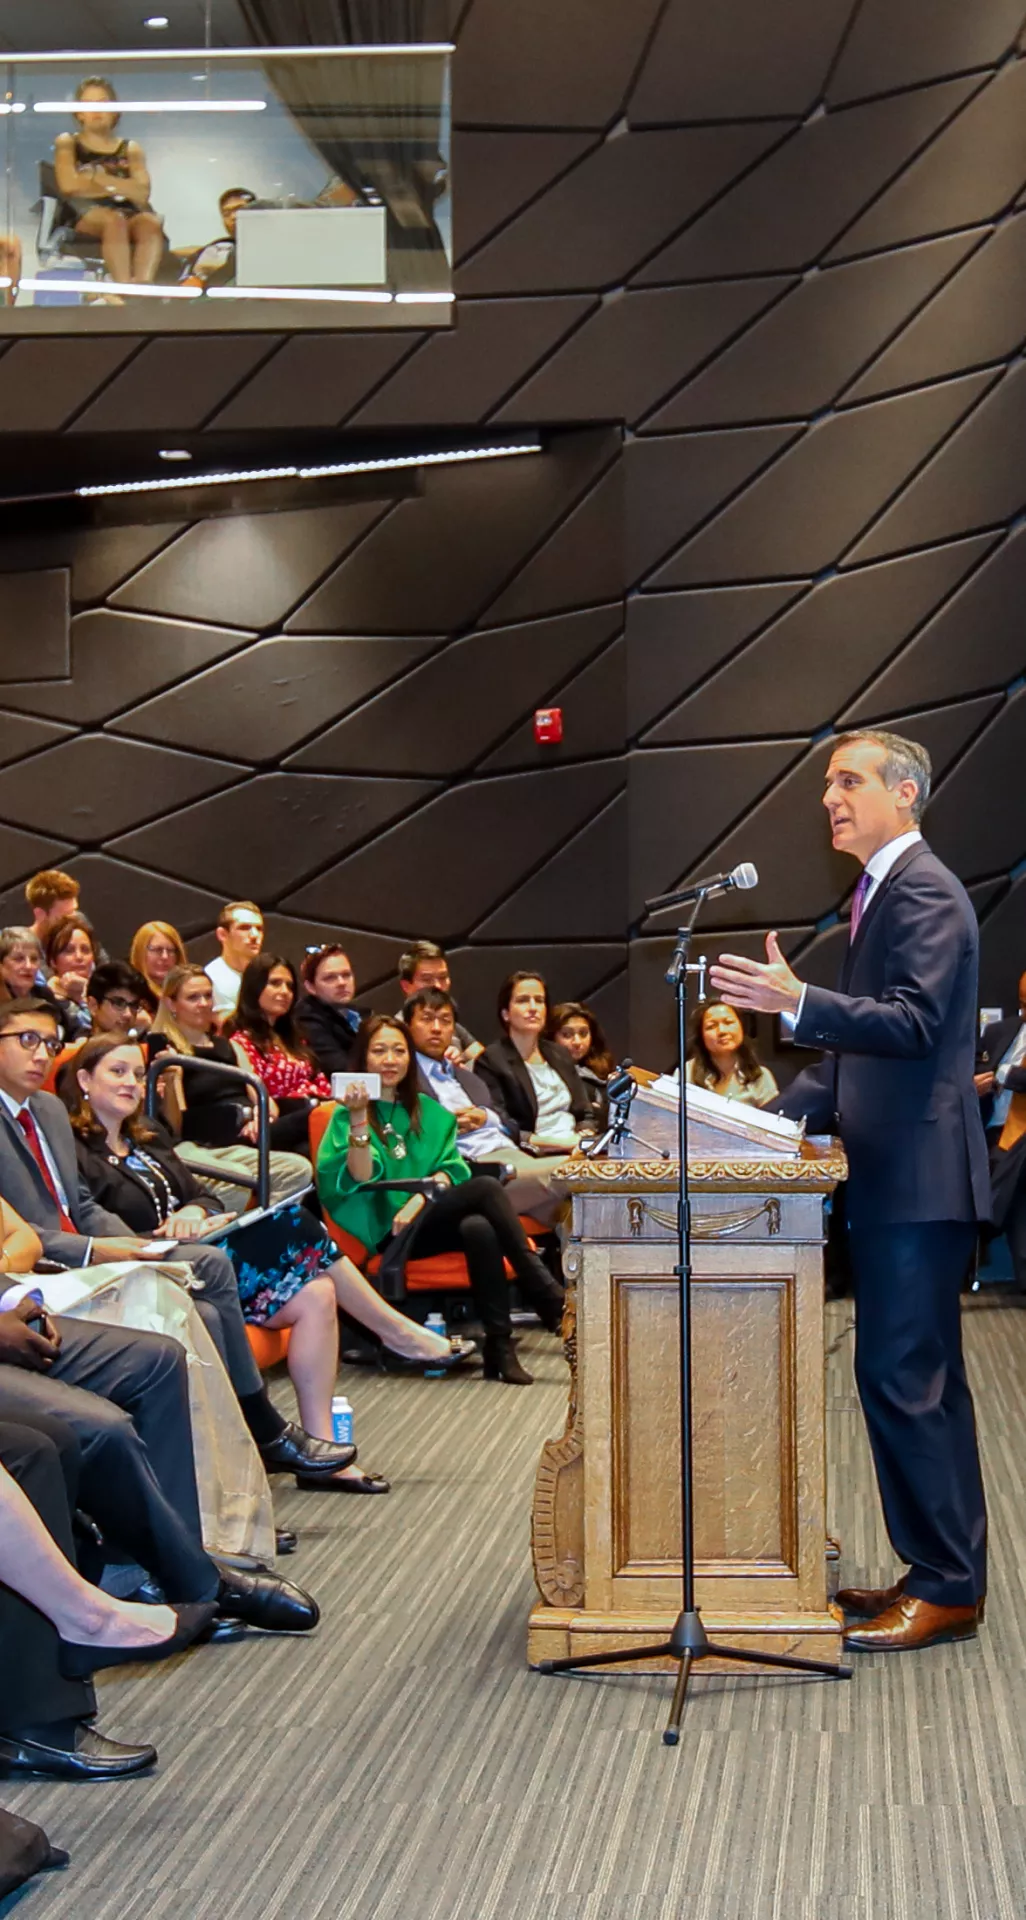 image shows Mayor Eric Garcetti at a podium speaking to an audience.